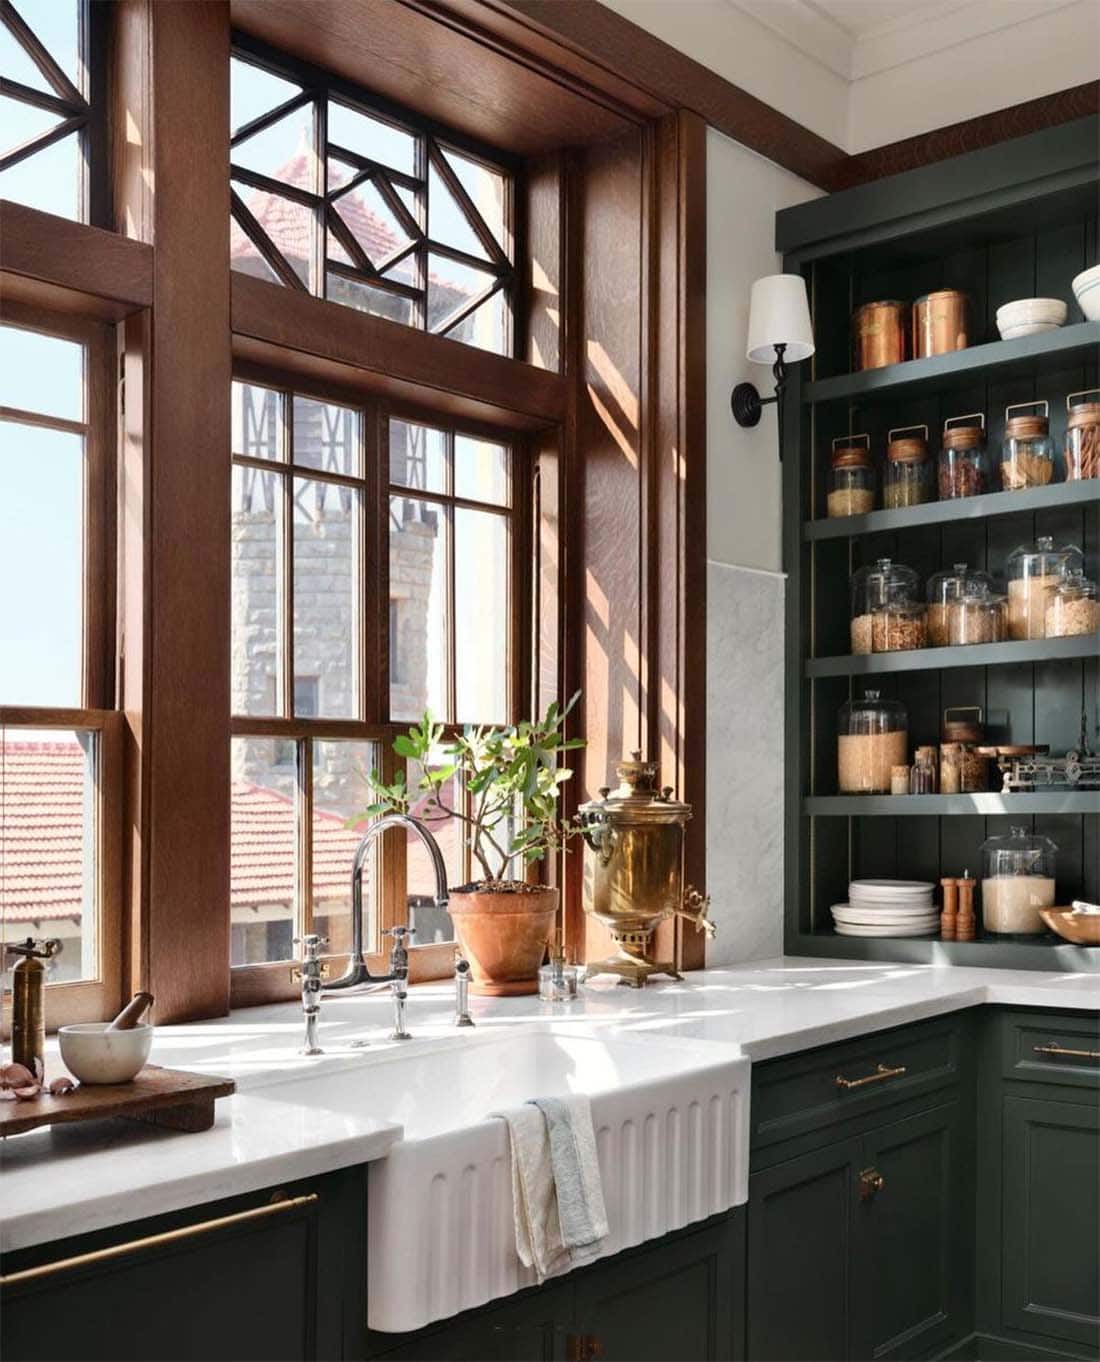 deep-green-cabinets-with-detailed-wood-windows-paint-color-cottage-grove-by-magnolia-home-for-kilzbrand